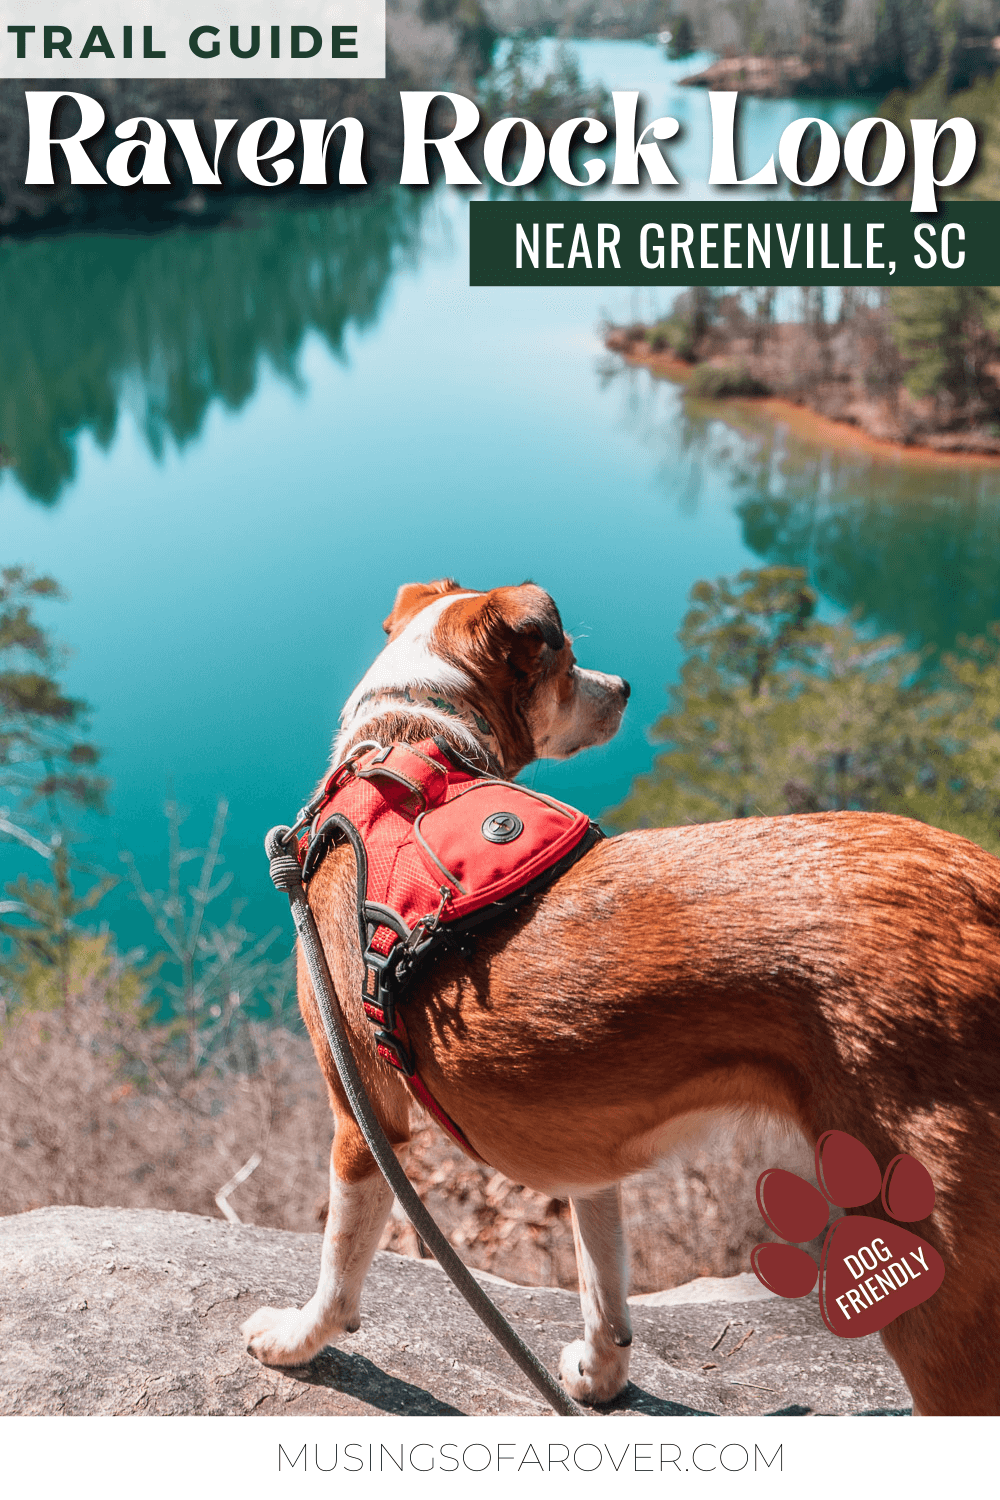 This hike will take you to Raven Rock an amazing view overlooking Lake Keowee. Plus you'll hike the Natural Bridge Trail as well as parts of the Eastatoe Passage of the Palmetto Trail. Don't miss this hike in Keowee-Toxaway State Park near Greenville, SC!